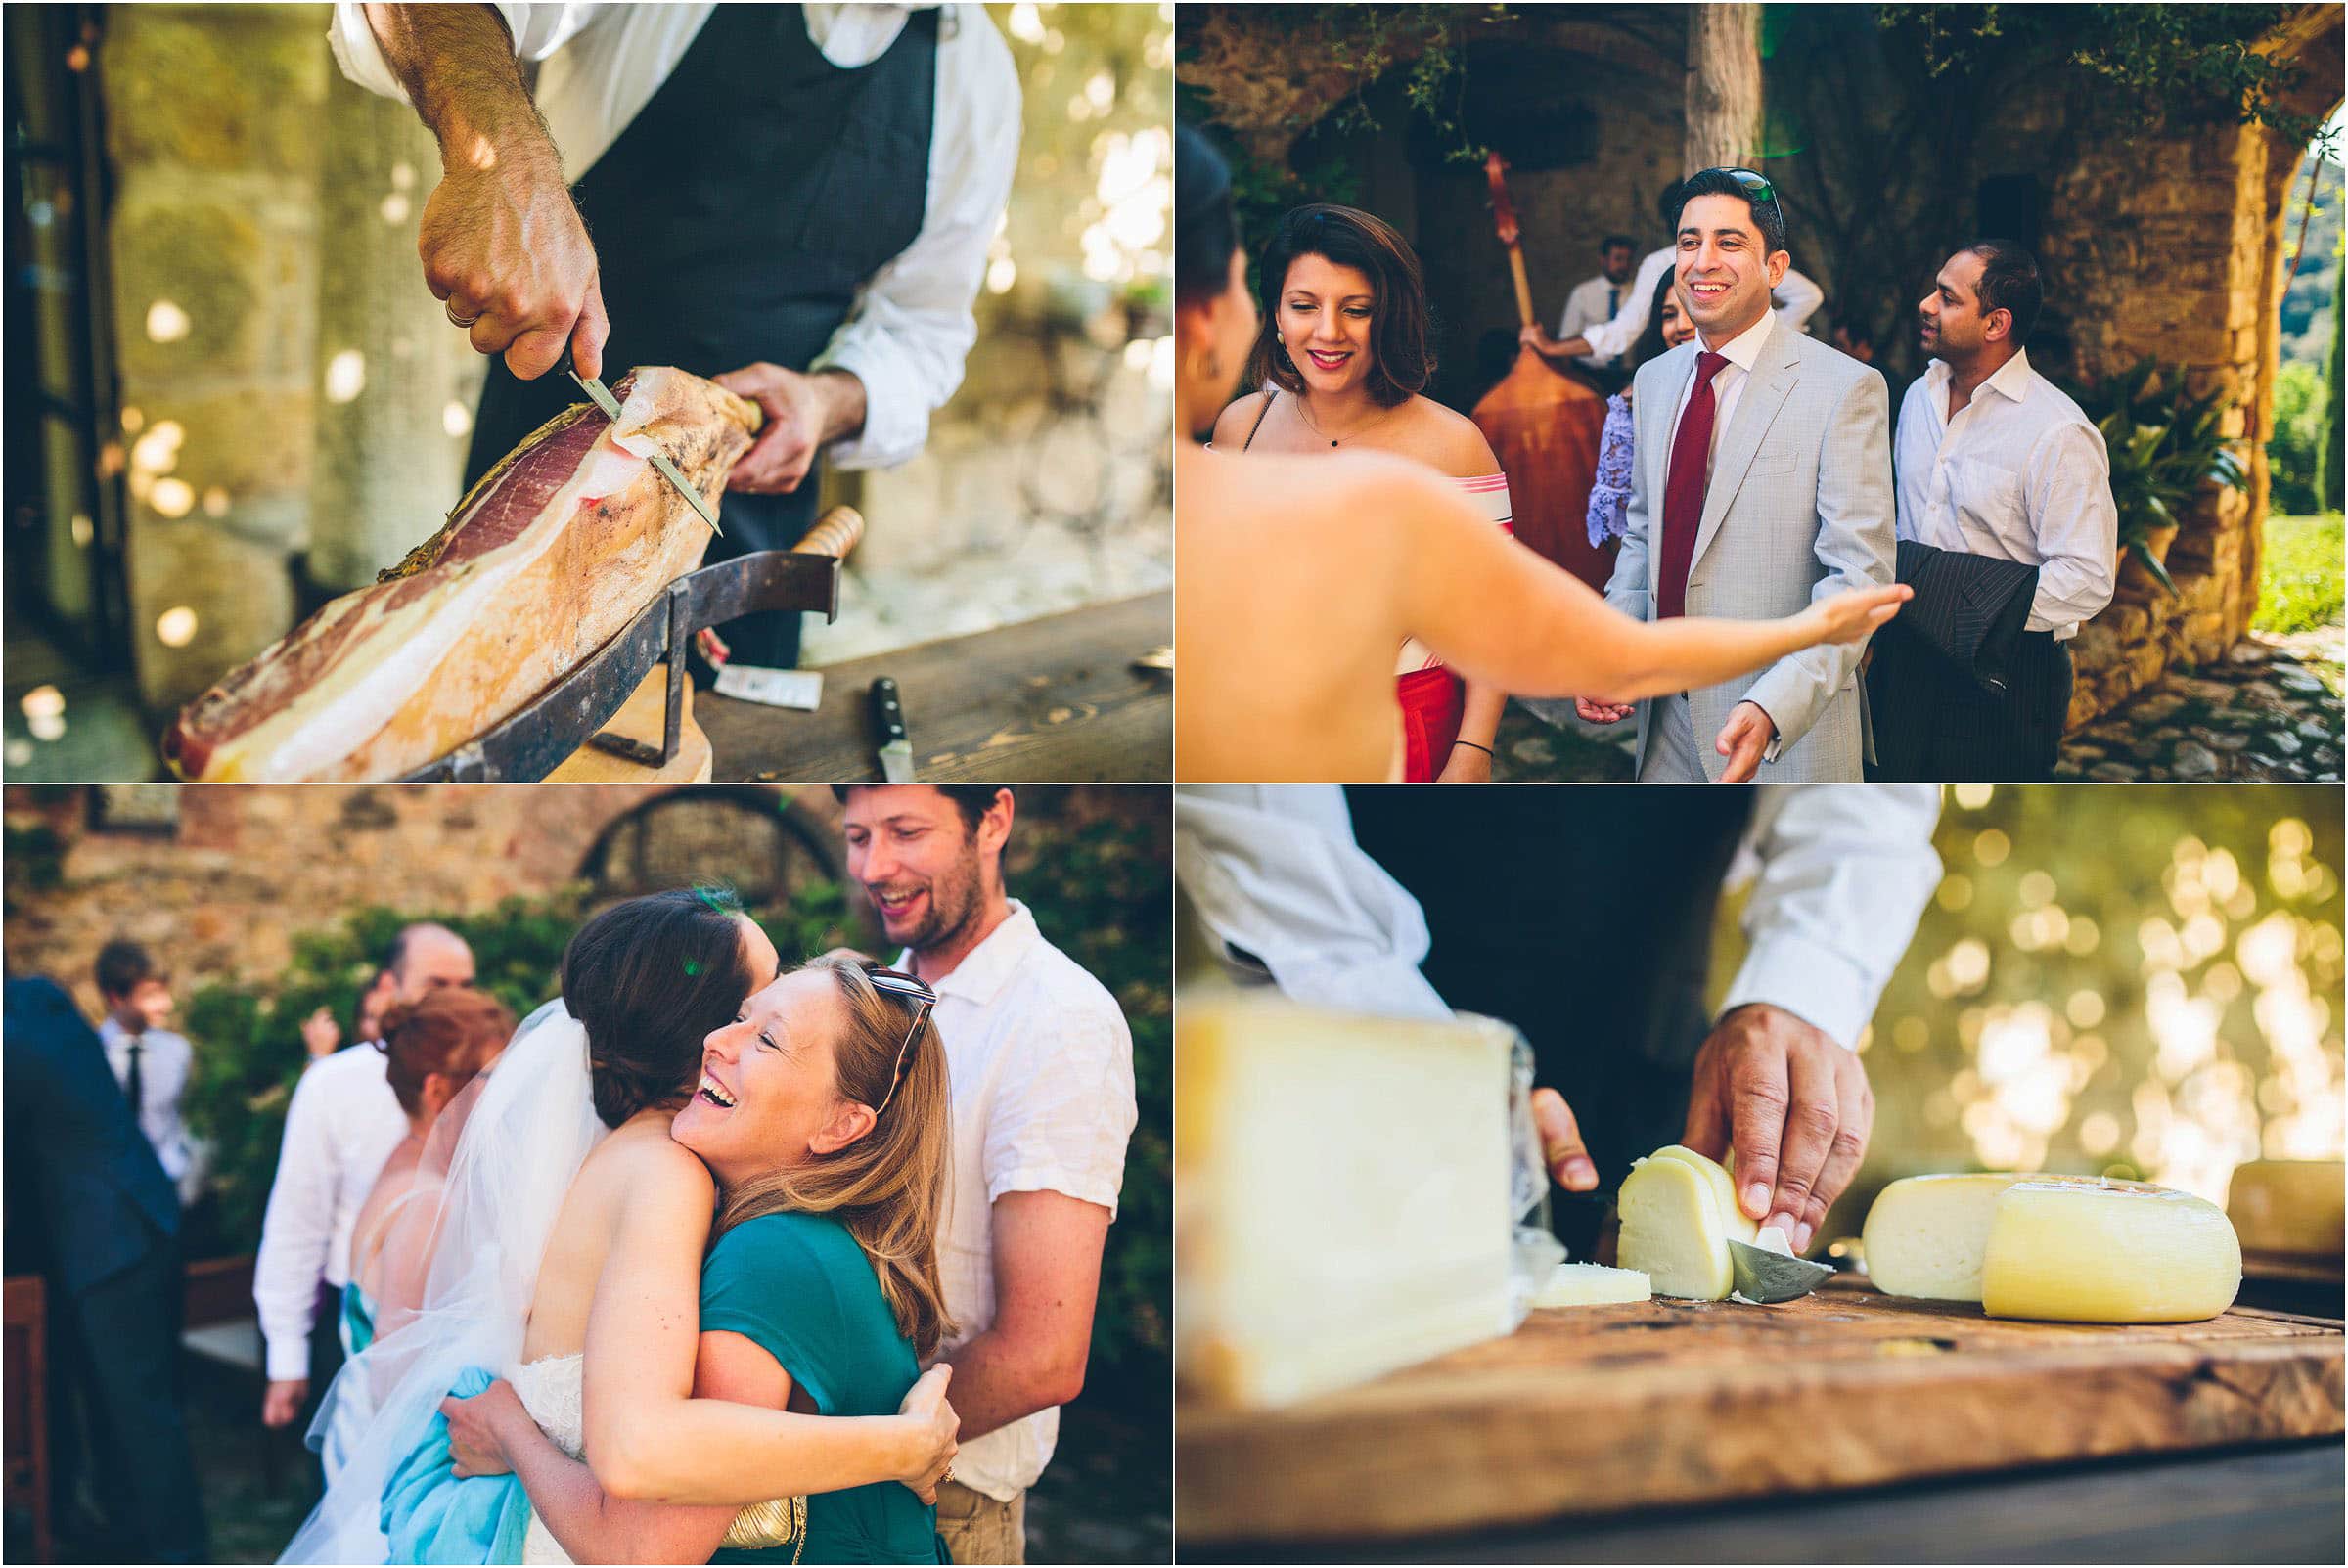 A photograph of wedding guests arriving at Castello di Vicarello in Tuscany to enjoy cured meets and cheese